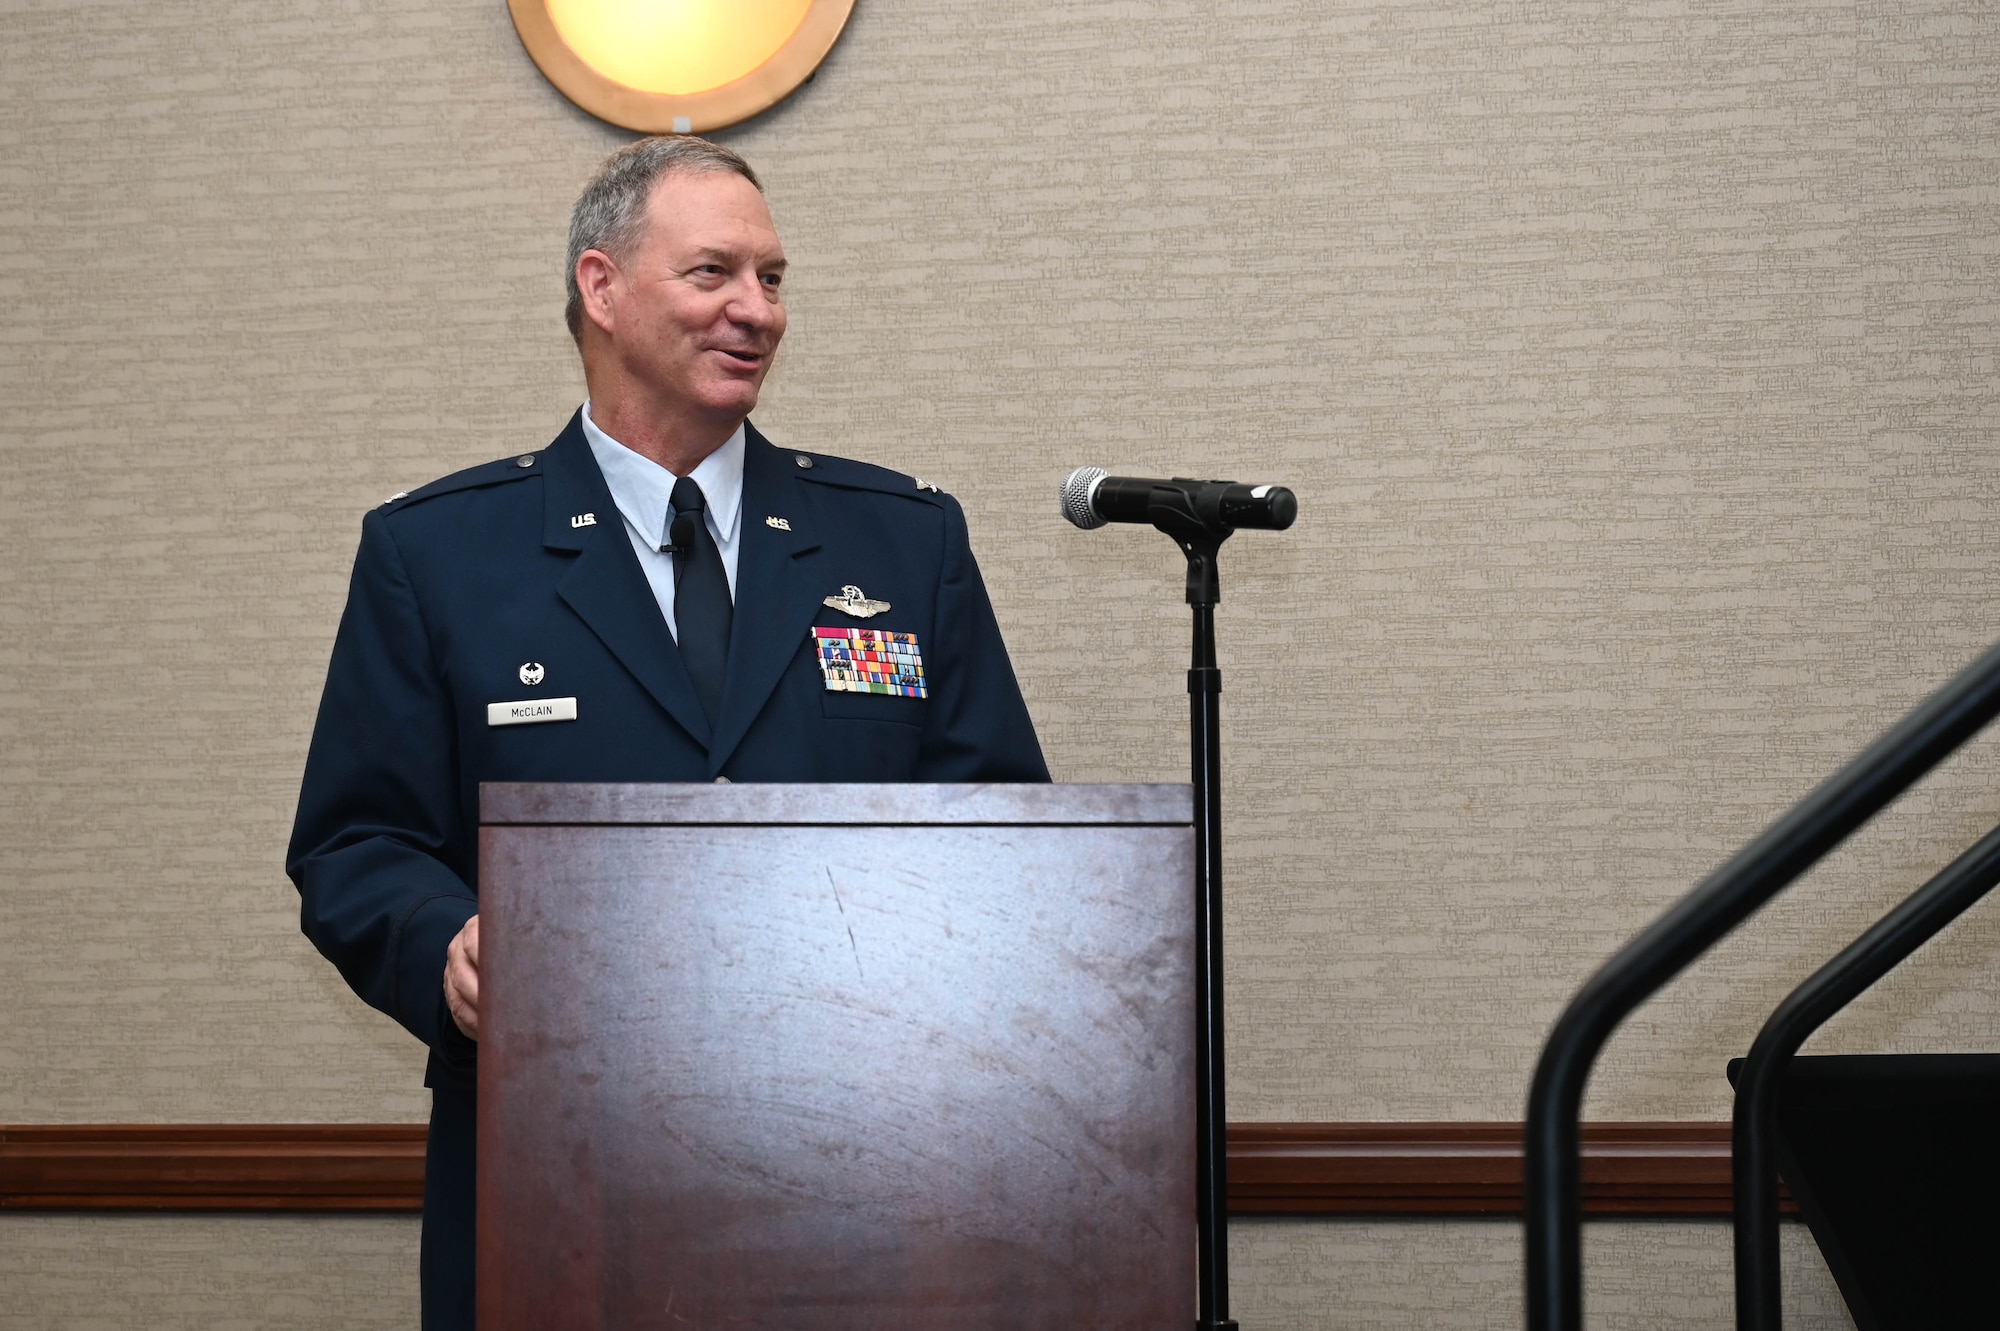 Col. Terry McClain, 433rd Airlift Wing commander, presides over the Honorary Commanders’ Induction Ceremony in San Antonio, July 9, 2022. This was the second Honorary Commanders’ Induction Ceremony this year. (U.S. Air Force photo by Senior Airman Brittany Wich)